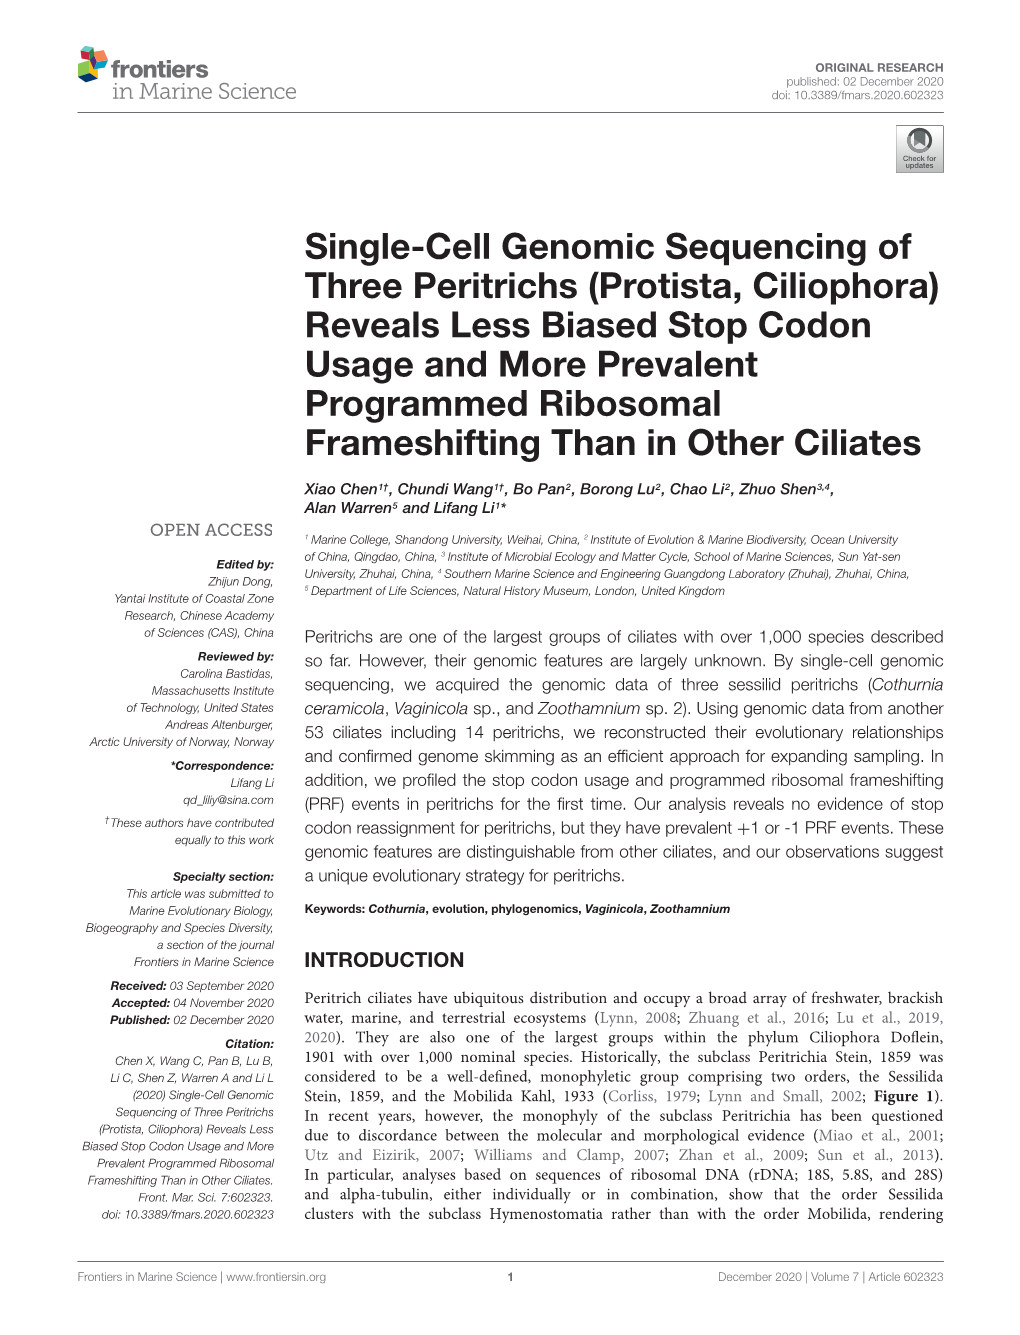 Single-Cell Genomic Sequencing of Three Peritrichs